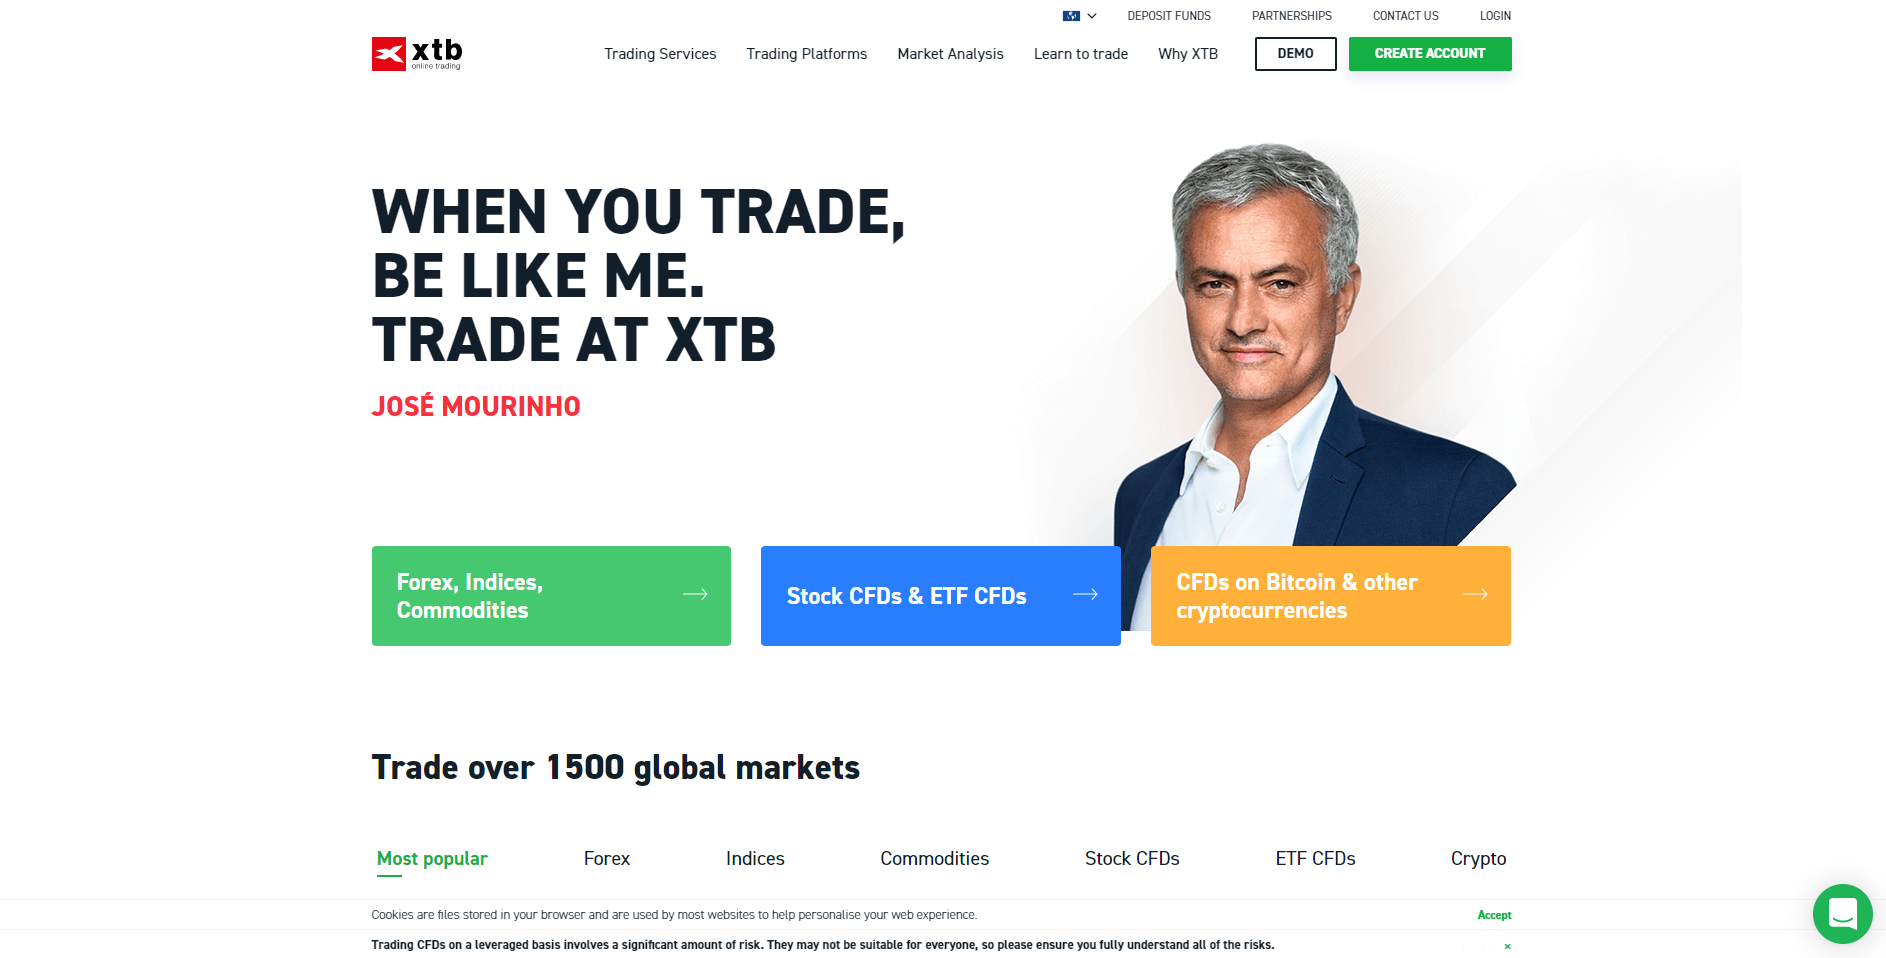 Official website of the forex platform XTB